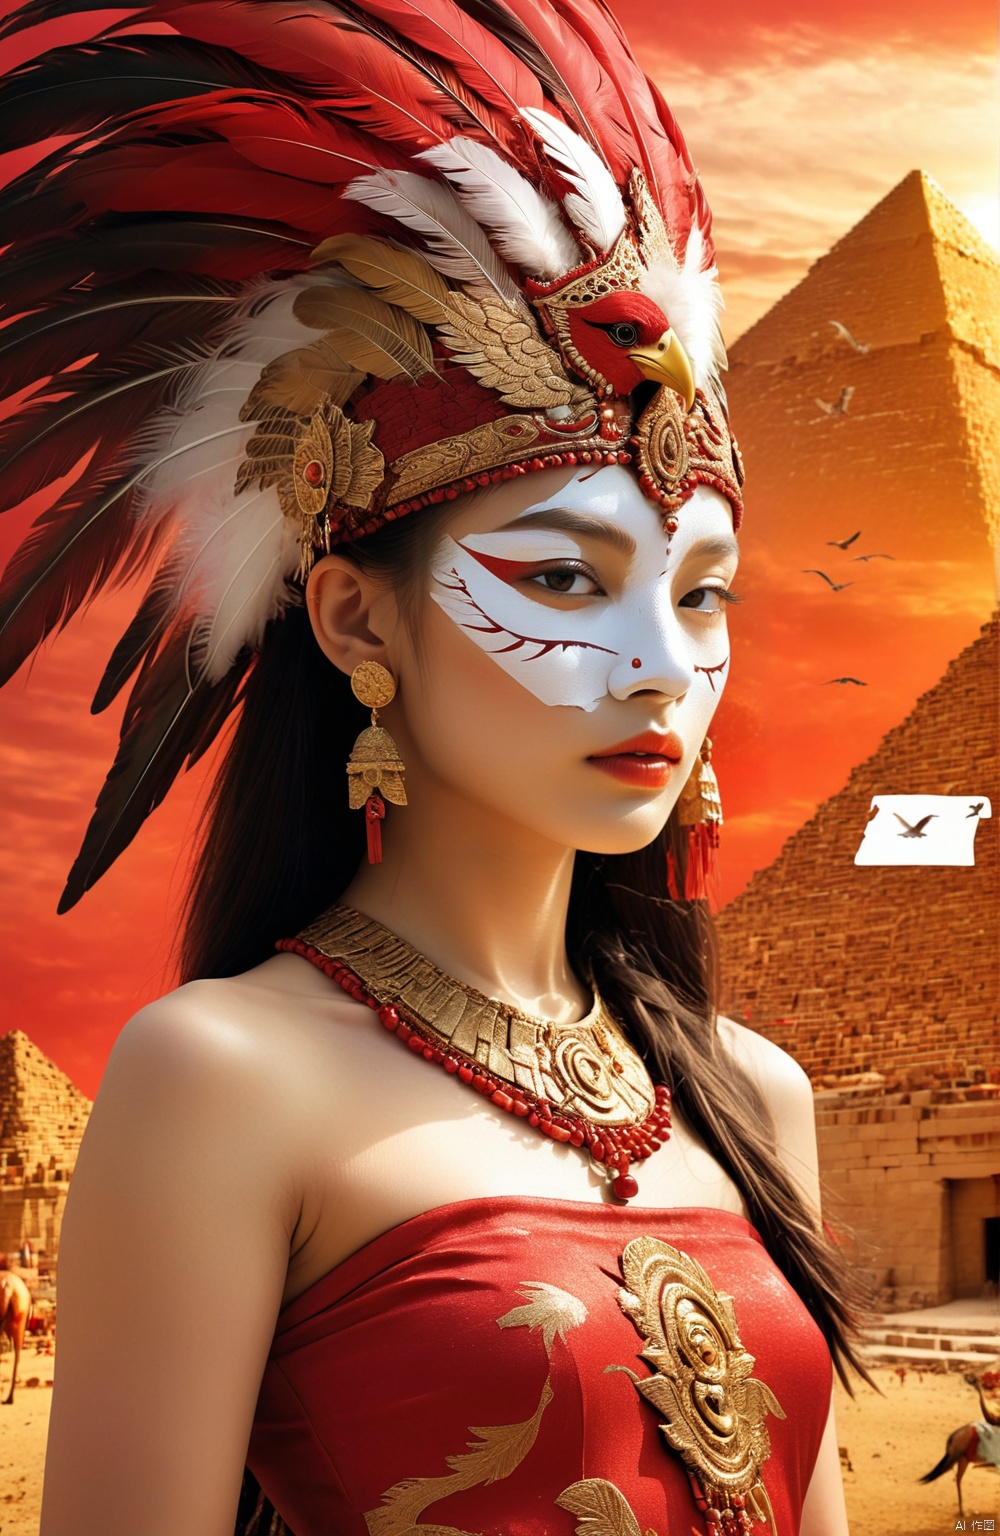  A surreal and fantastical image of a lonely young woman fusing human form with bird features. Her face is adorned with a gold mask, her straight nose and sexy lips reveal the girl's beauty, feathers adorn her headdress, and her bare shoulders reveal a mature body

, hhfhb, Red festive wallpaper, pyramid